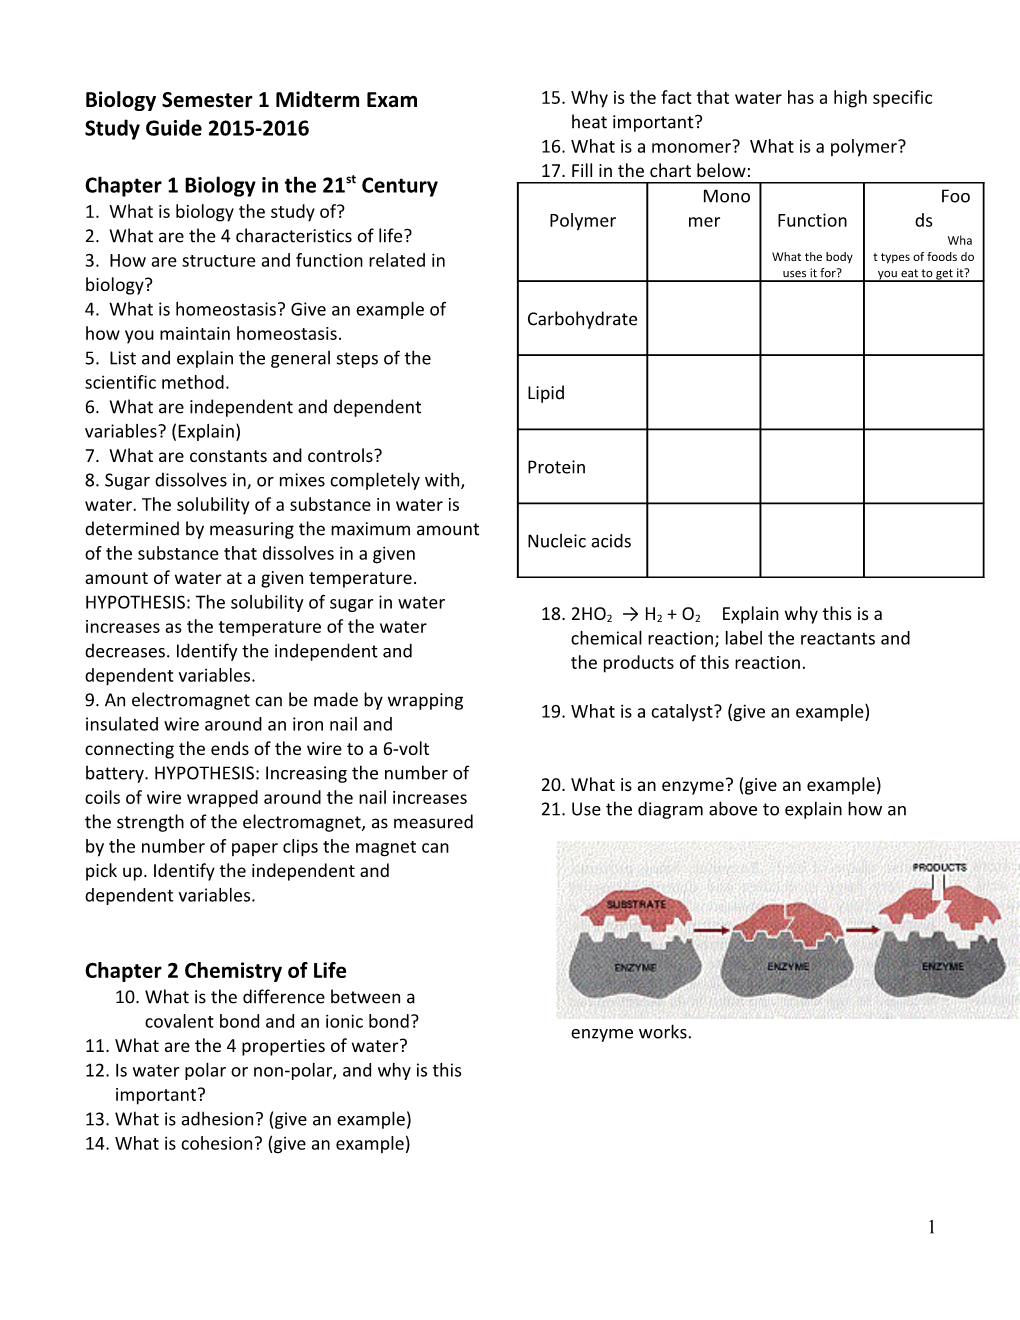 Chapter 1 Biology Exam Study Guide